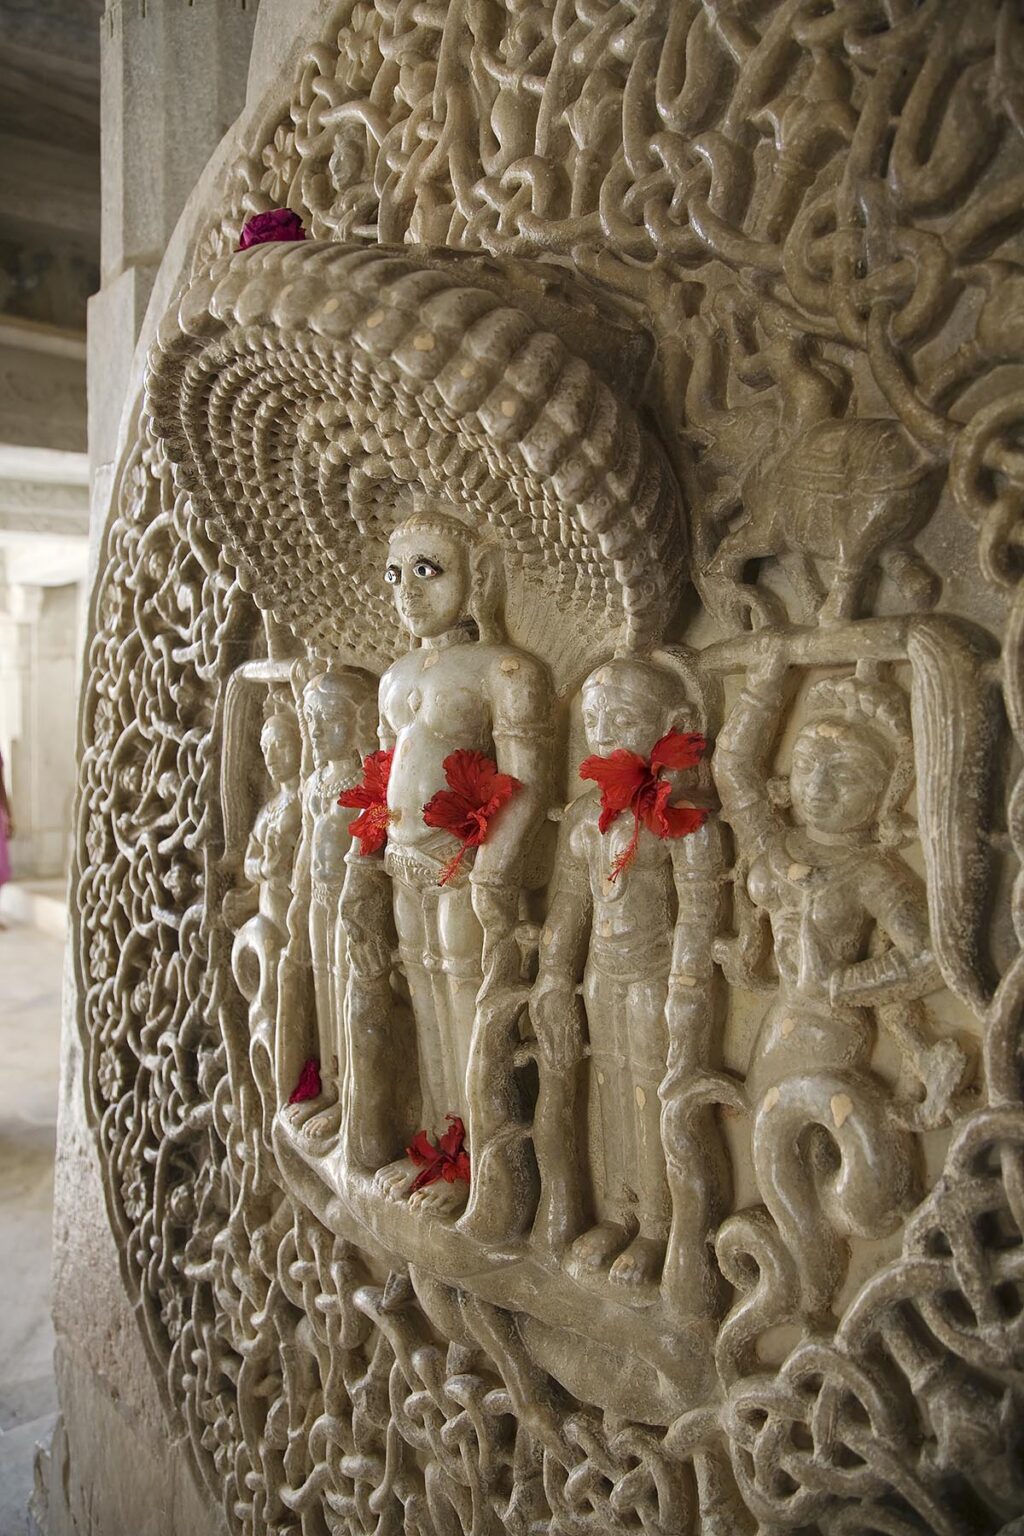 Carved CELESTIAL DEITIES protected by108 COBRAS inside the CHAUMUKHA MANDIR TEMPLE at RANAKPUR in the Pali District of RAJASTHAN near Sadri - INDIA